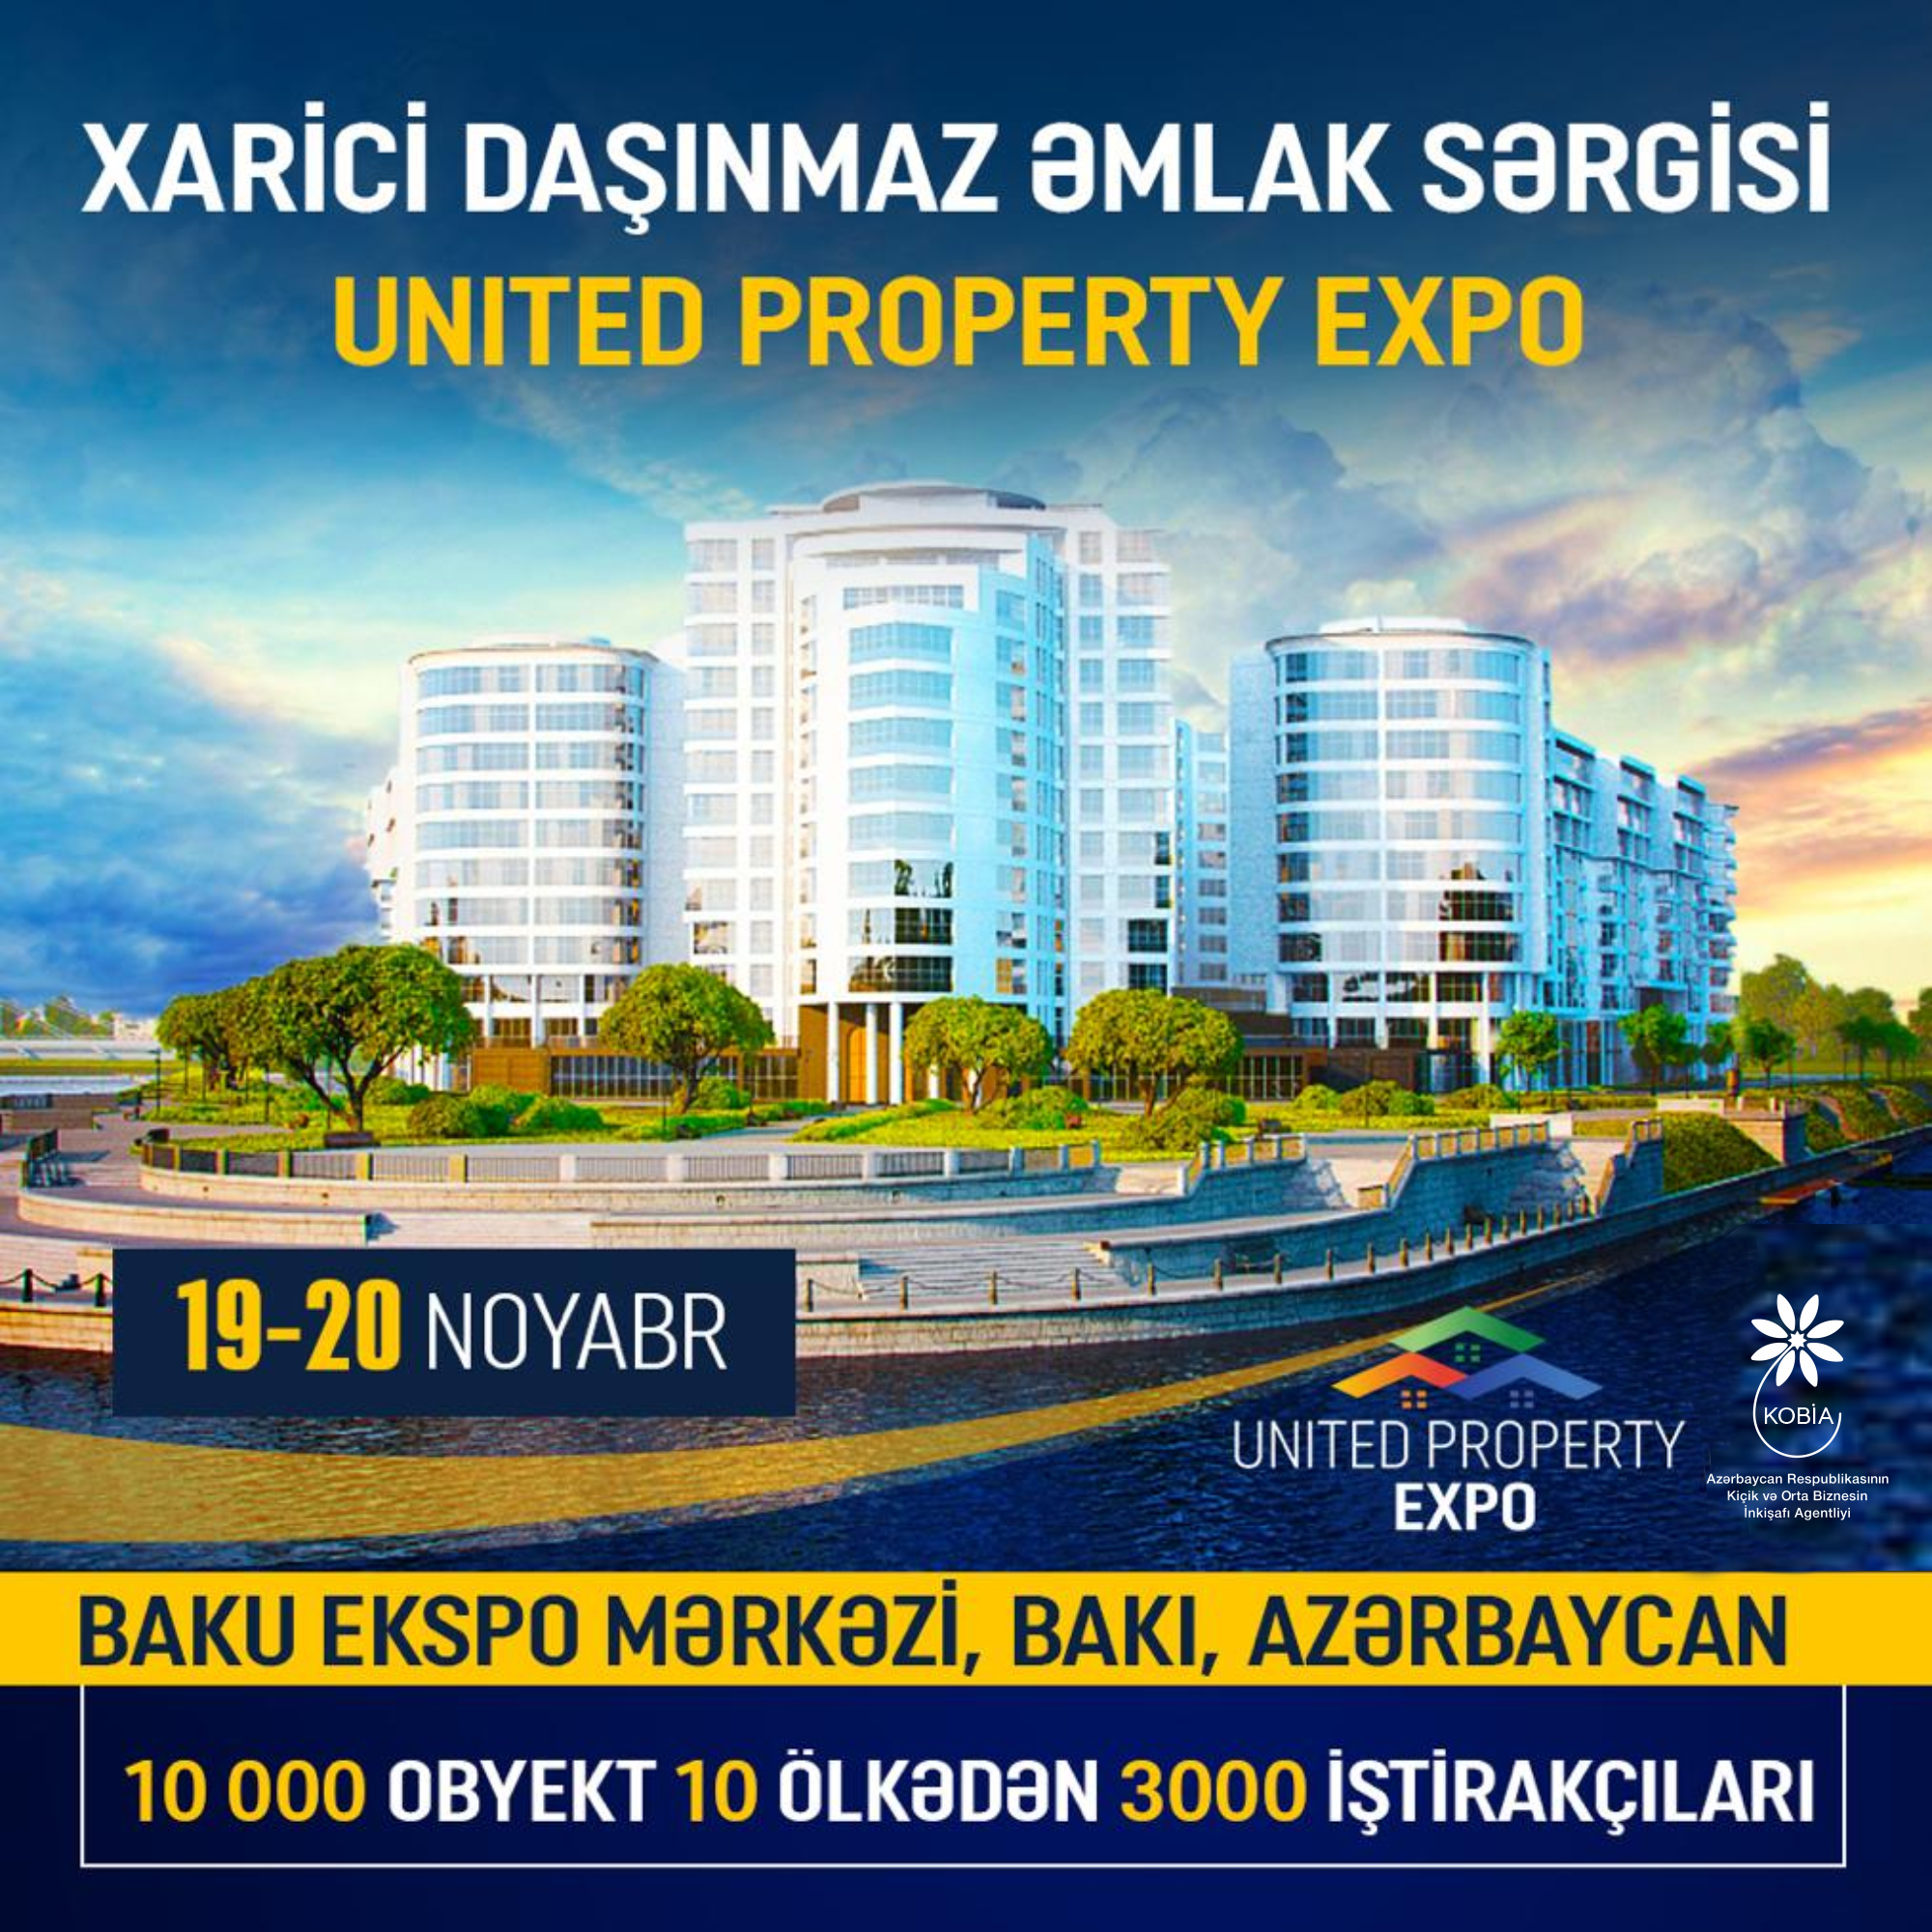 "United Property Expo 2022" foreign real estate exhibition will be held in Baku 